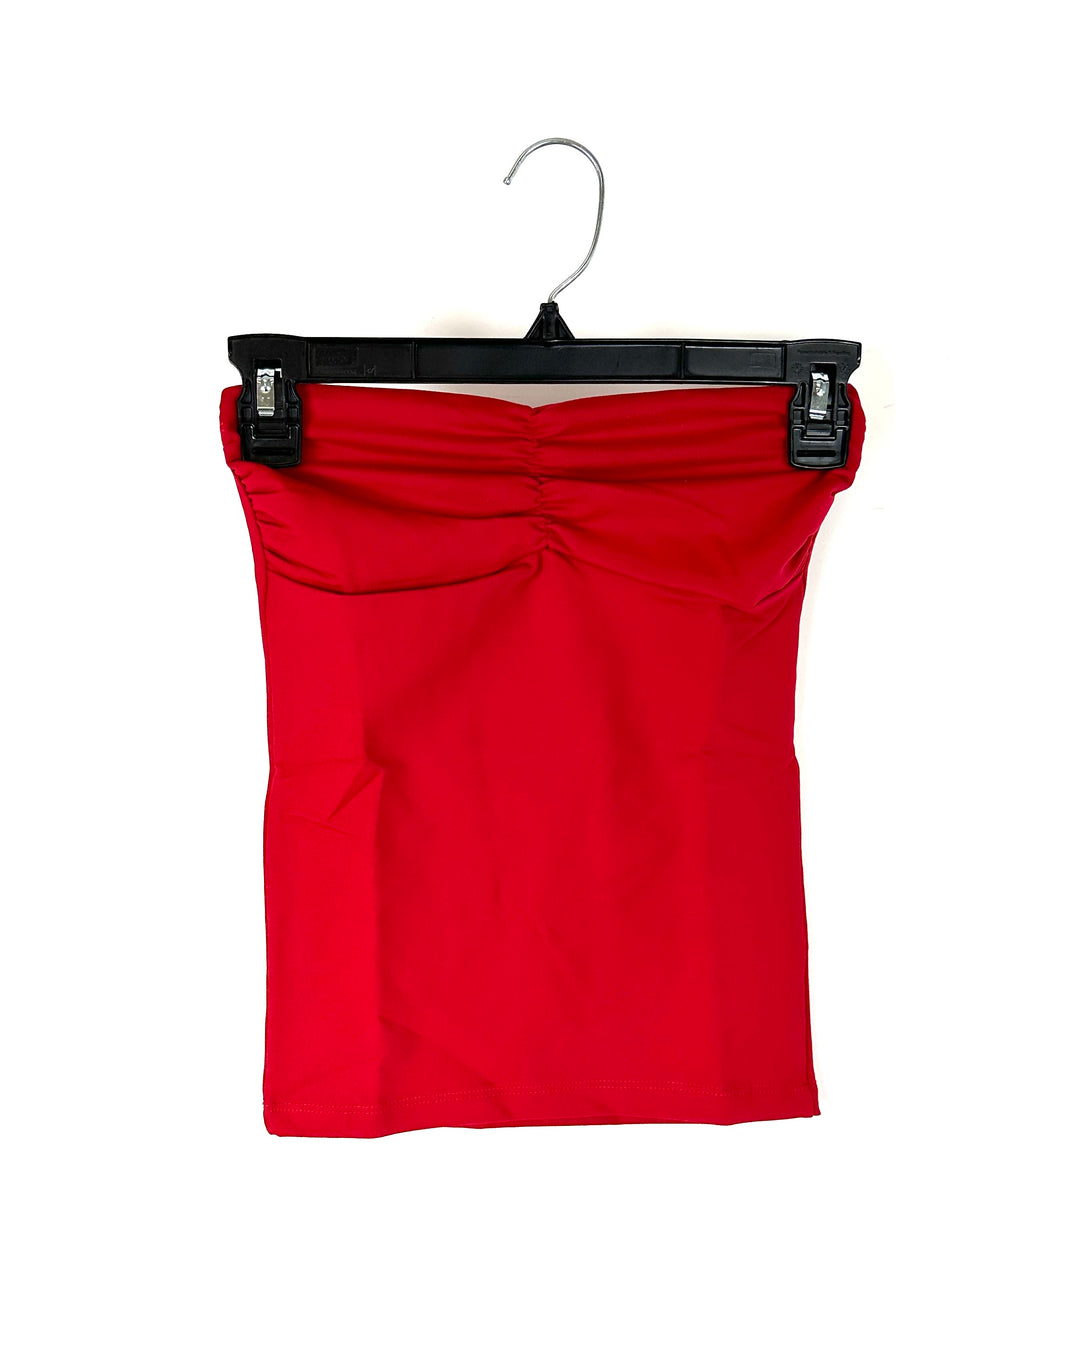 Red Tube Top - Extra Small, Small, Medium, Large